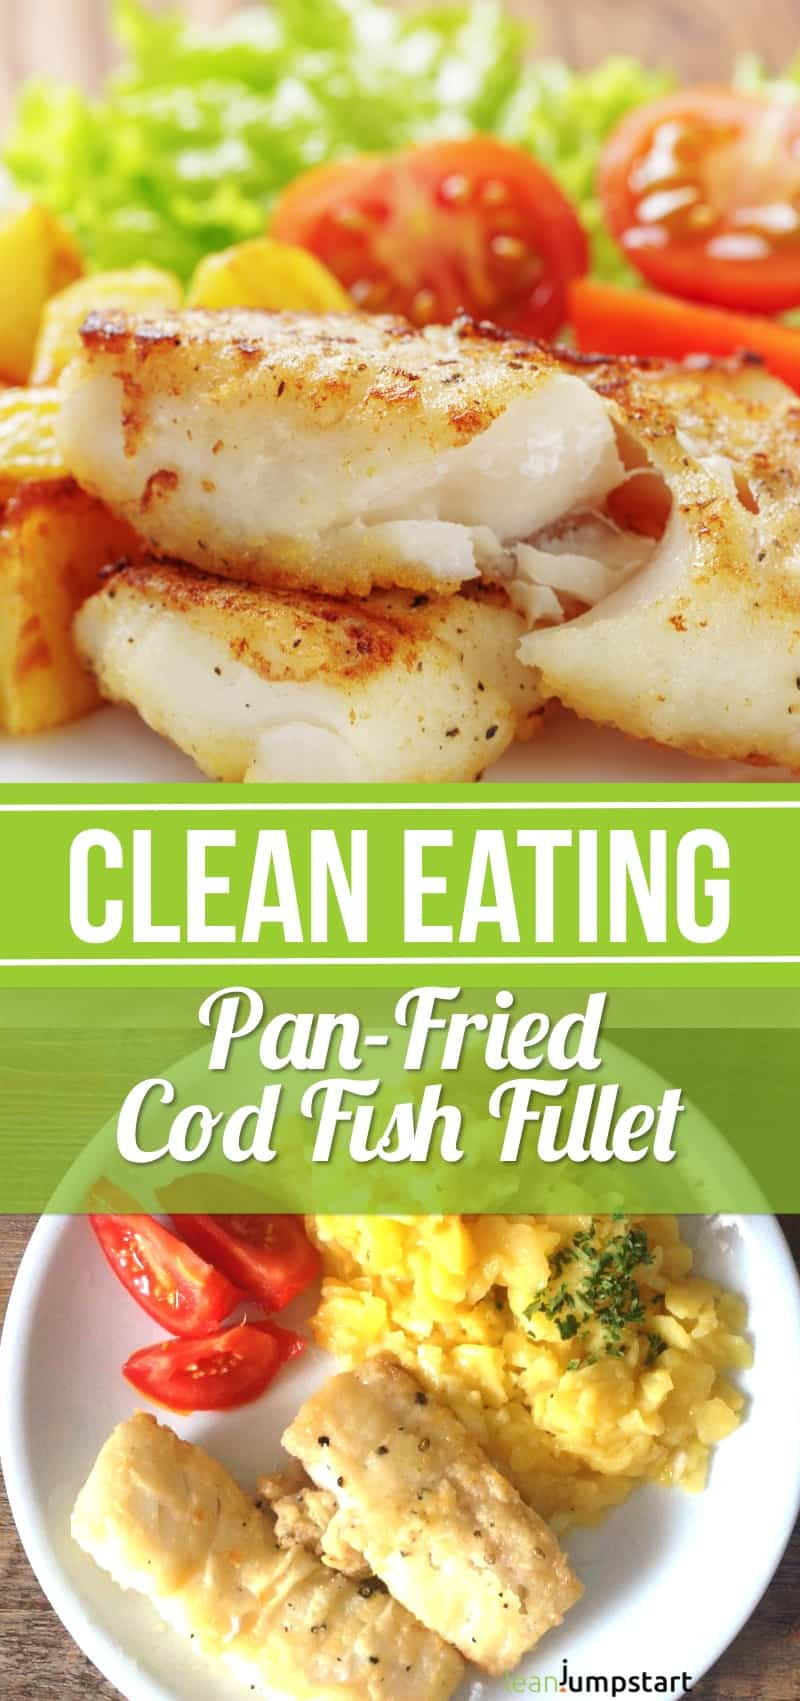 Fish Recipes Healthy
 Cod Fish Recipes How to cook pan fried cod the healthy way